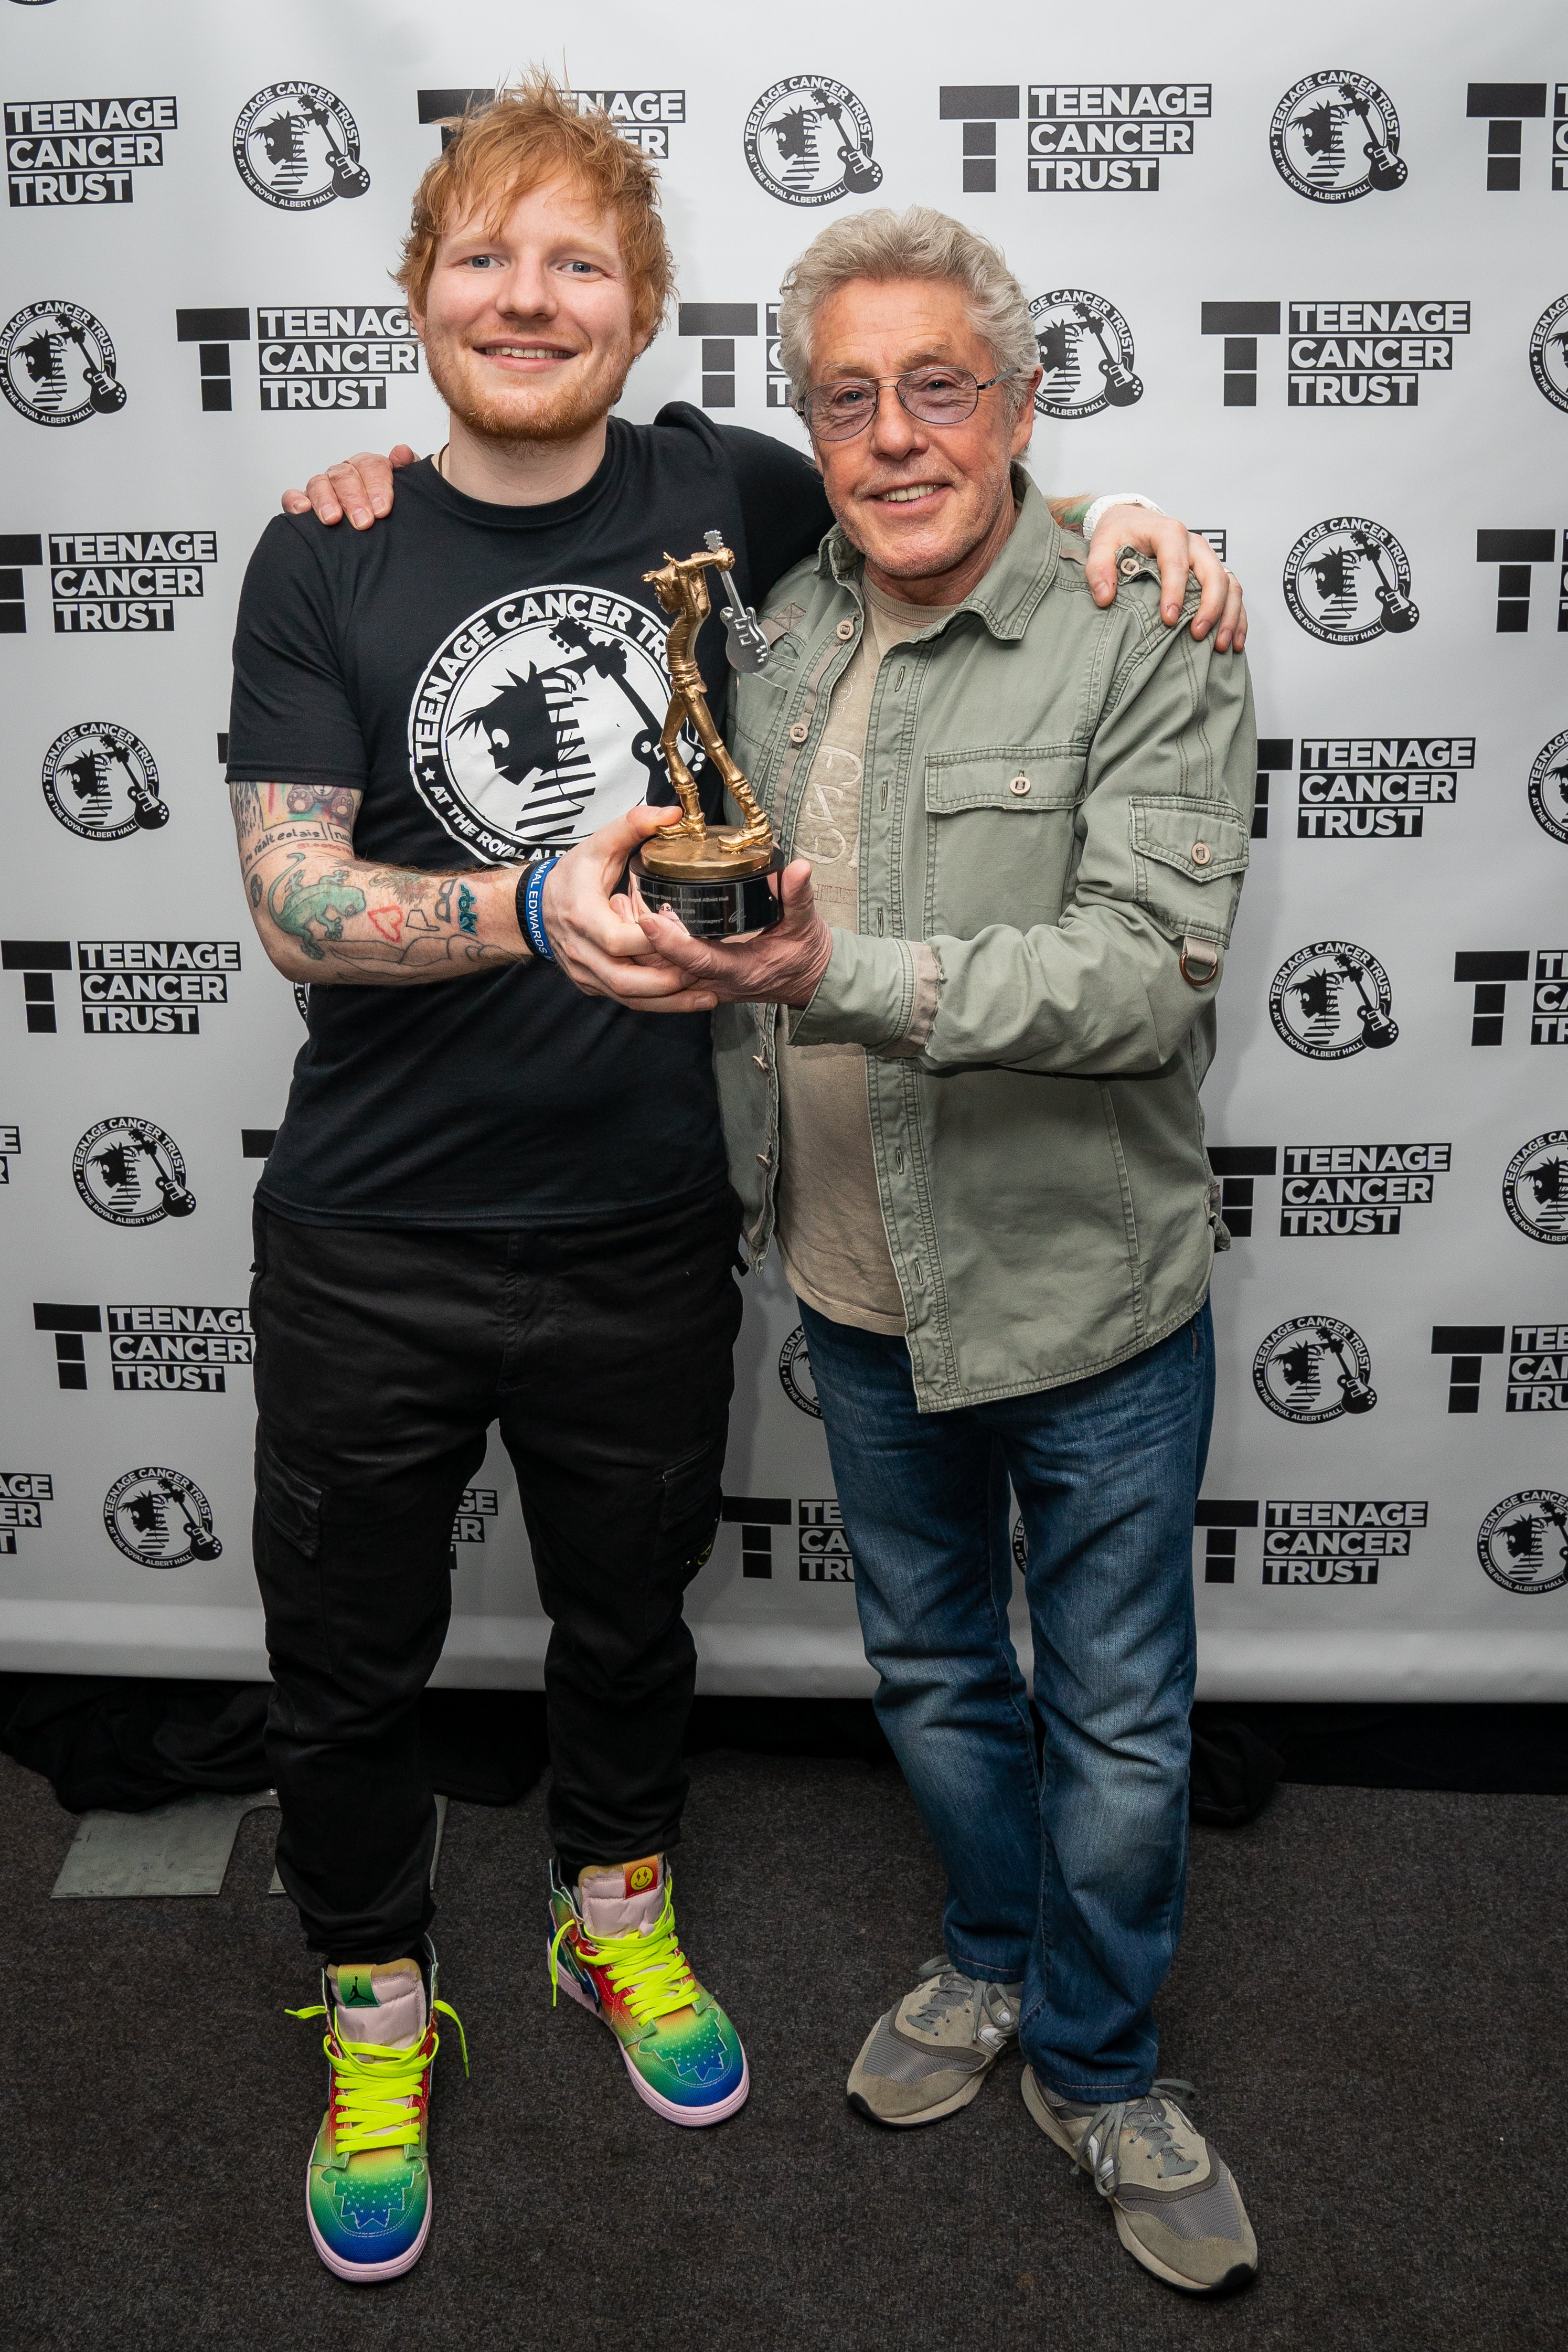 Daltrey with Ed Sheeran at a Teenage Cancer Trust event